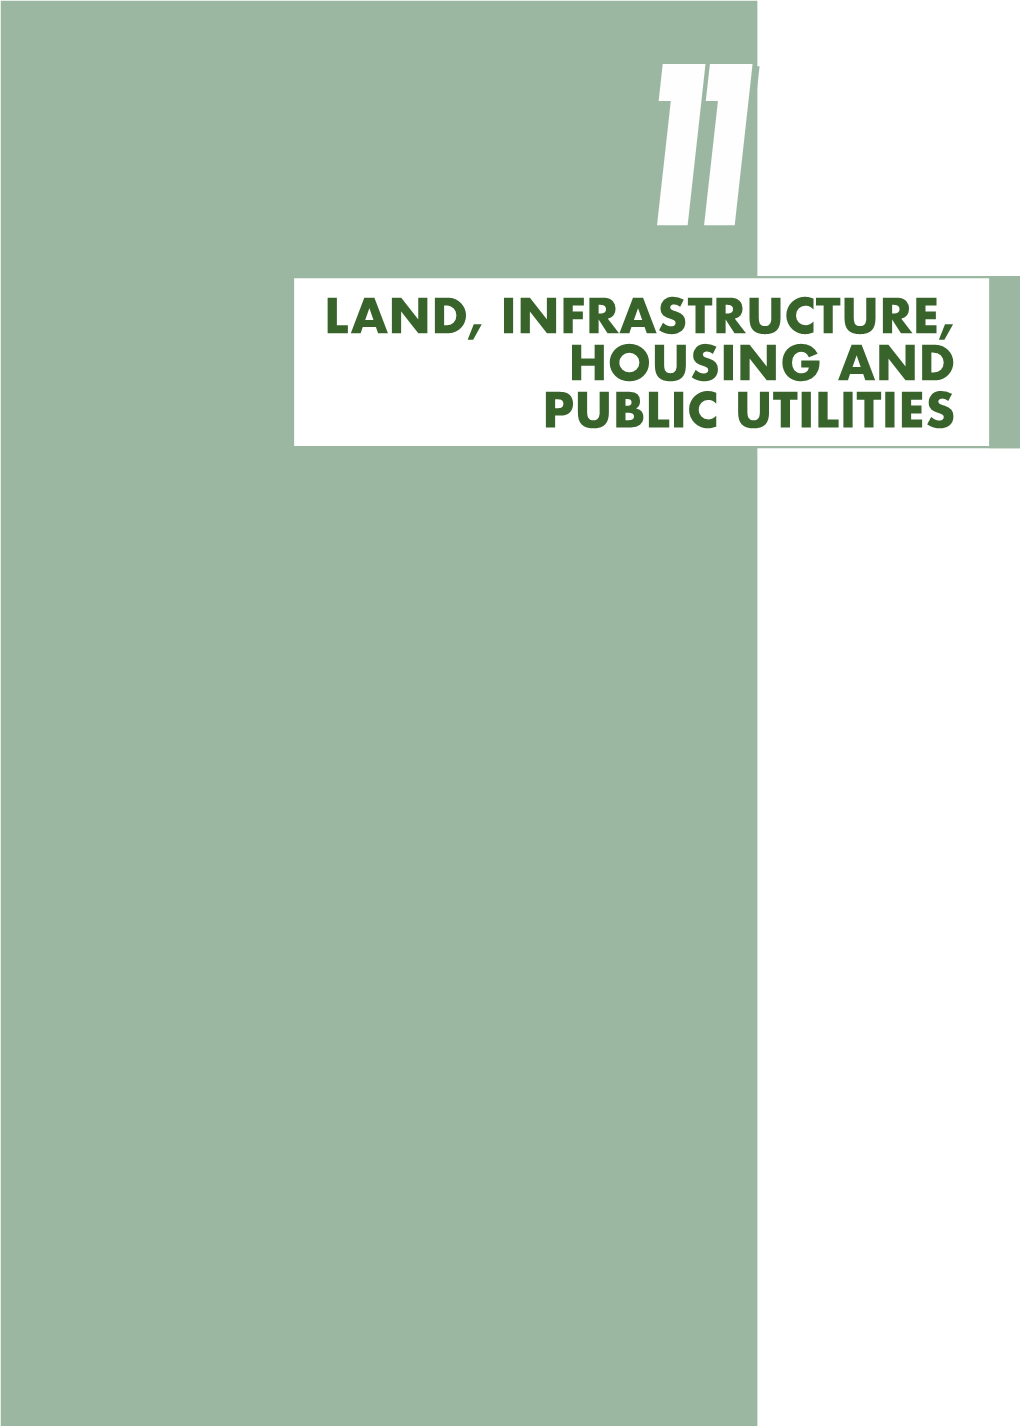 Land, Infrastructure, Housing and Public Utilities